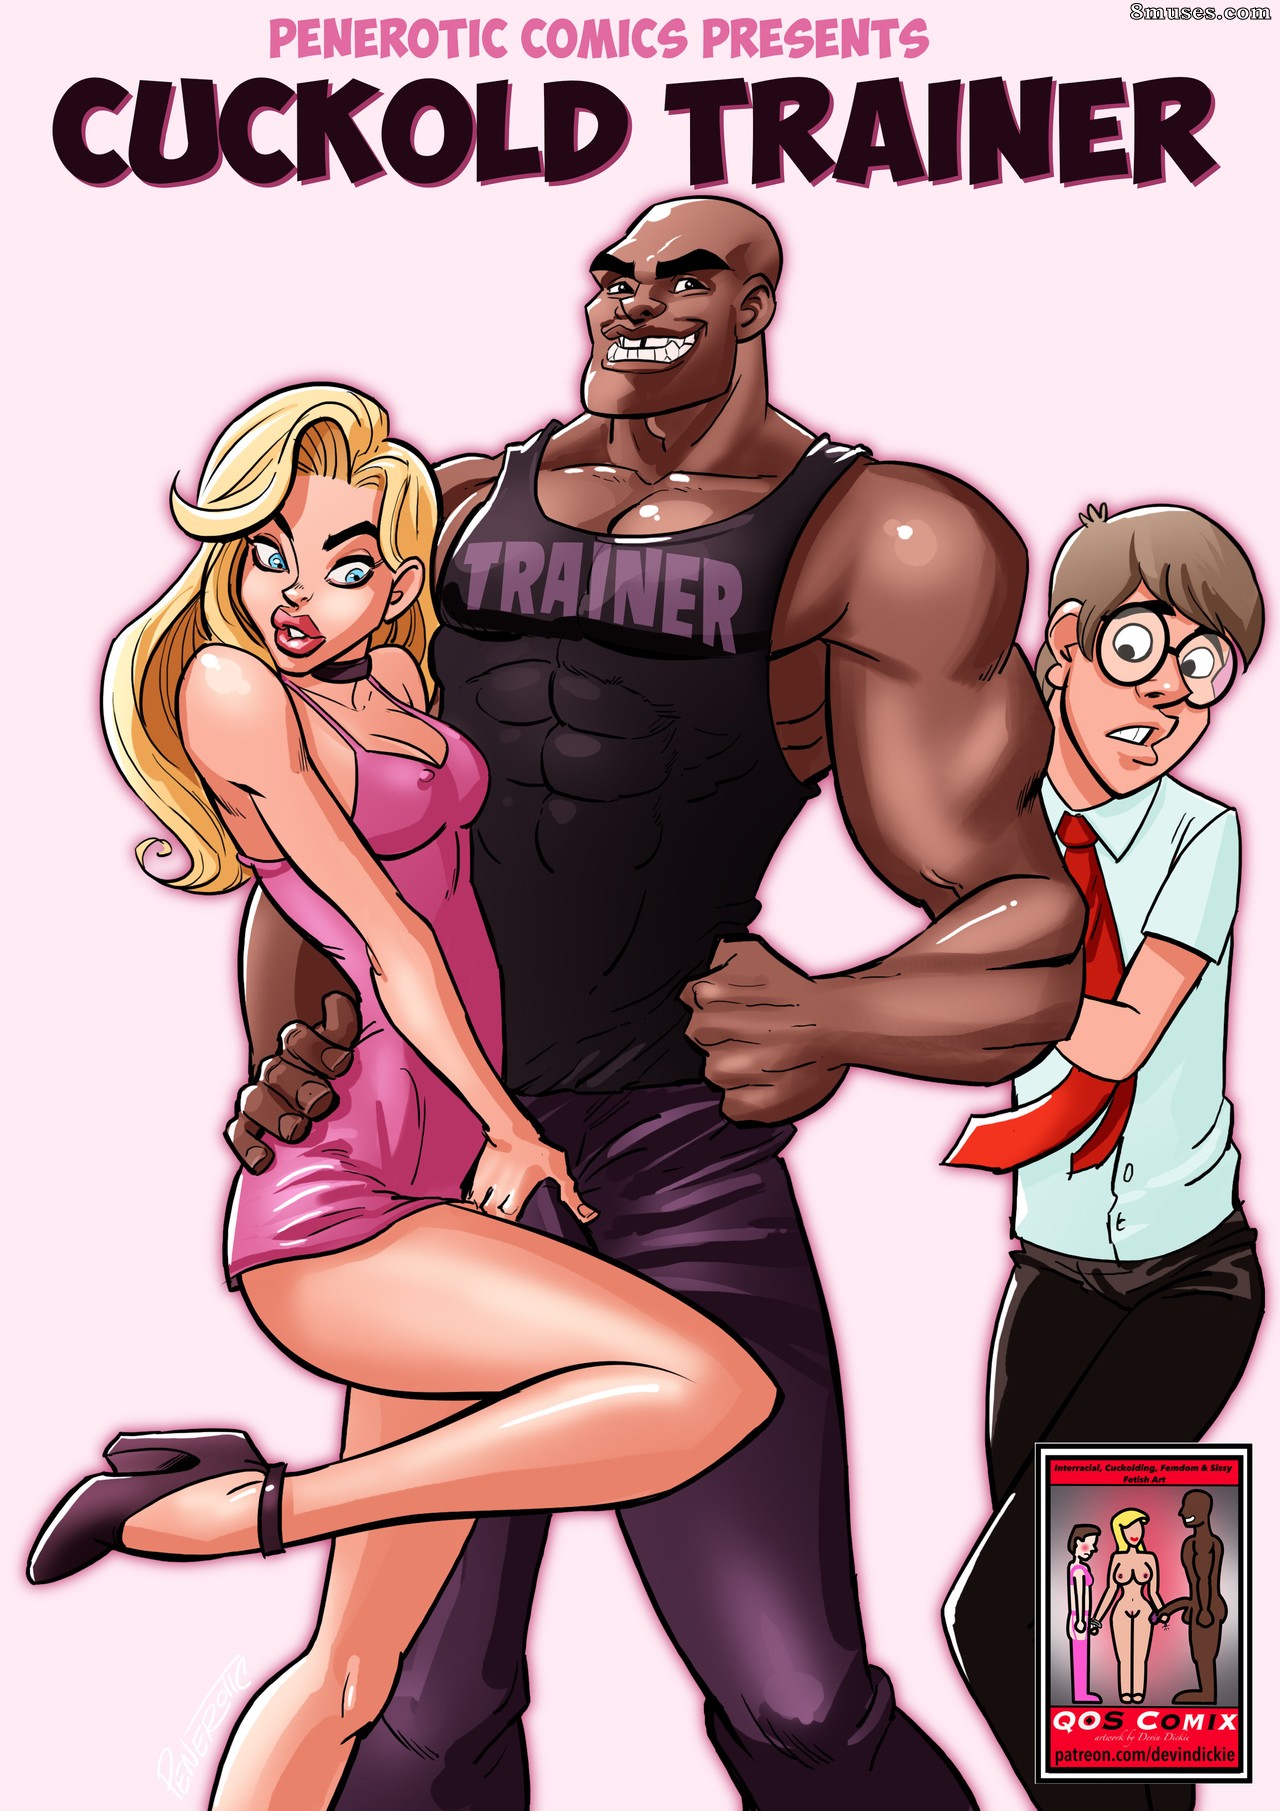 Cuckold Trainer Issue 1 - 8muses Comics